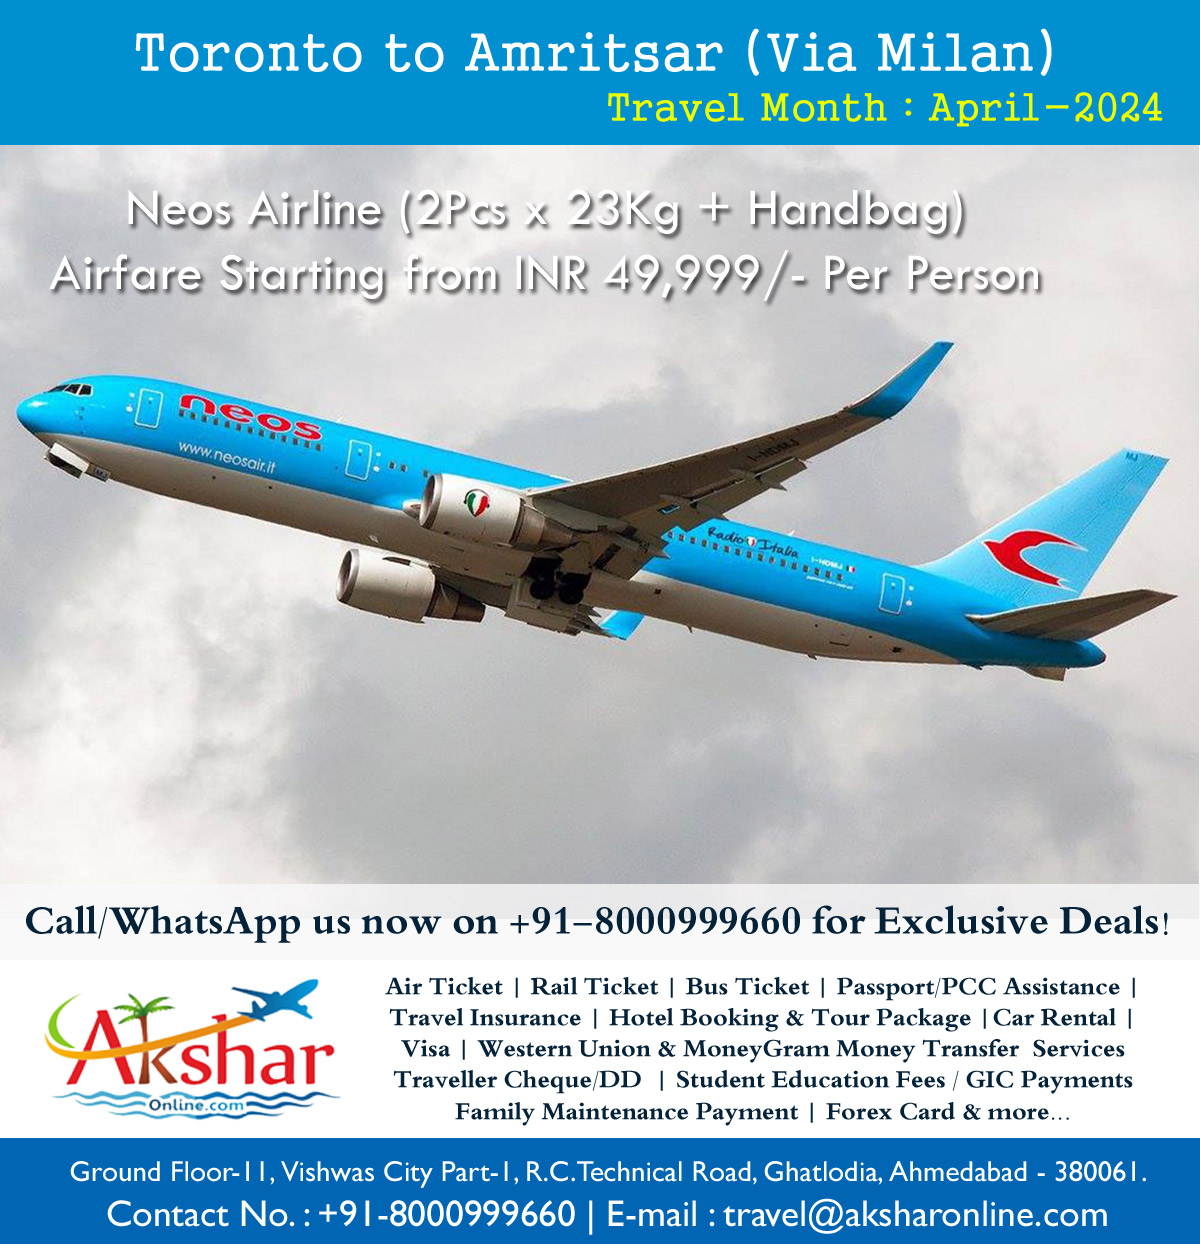 🌟 Exciting News! 🌟 Dreaming of flying from Toronto to Amritsar this April 2024? Now you can make that dream a reality with Neos Airline! ✈️ Book your tickets now for an amazing fare starting from just INR 49,999/-! 🎉 But wait, there's more! For the best domestic and international airfare deals, simply call or WhatsApp us at +91-8000999660! 📲✈️ Don't miss out on this incredible opportunity to explore the world! #TravelDeals #TorontoToAmritsar #NeosAirline #BestAirfare #BookNow #TravelDeals #FlightOffers #ExploreWithUs #CanadaAirfare #CanadaFlight #CanadaFly #aksharonline #FlighttoCanada #Winipeg #toronto #CheapFlightsToIndia2024 #CanadaToIndiaFlightDeals #BudgetTravelIndia #FlyAffordableToIndia #AprilMayFlightSpecials #DiscountedTicketsToIndia #FlySmartToIndia #AffordableAirfareCanadaIndia #Spring2024FlightDeals #IndiaBoundOnABudget #CheapFlightToIndia2024 #FlyCanadaToIndiaBudget2024 #AprilMayTravelDeals #CanadaToIndiaAirfareDiscounts #BudgetTravelIndia2024 #CheapTicketsToIndia #FlightDeals